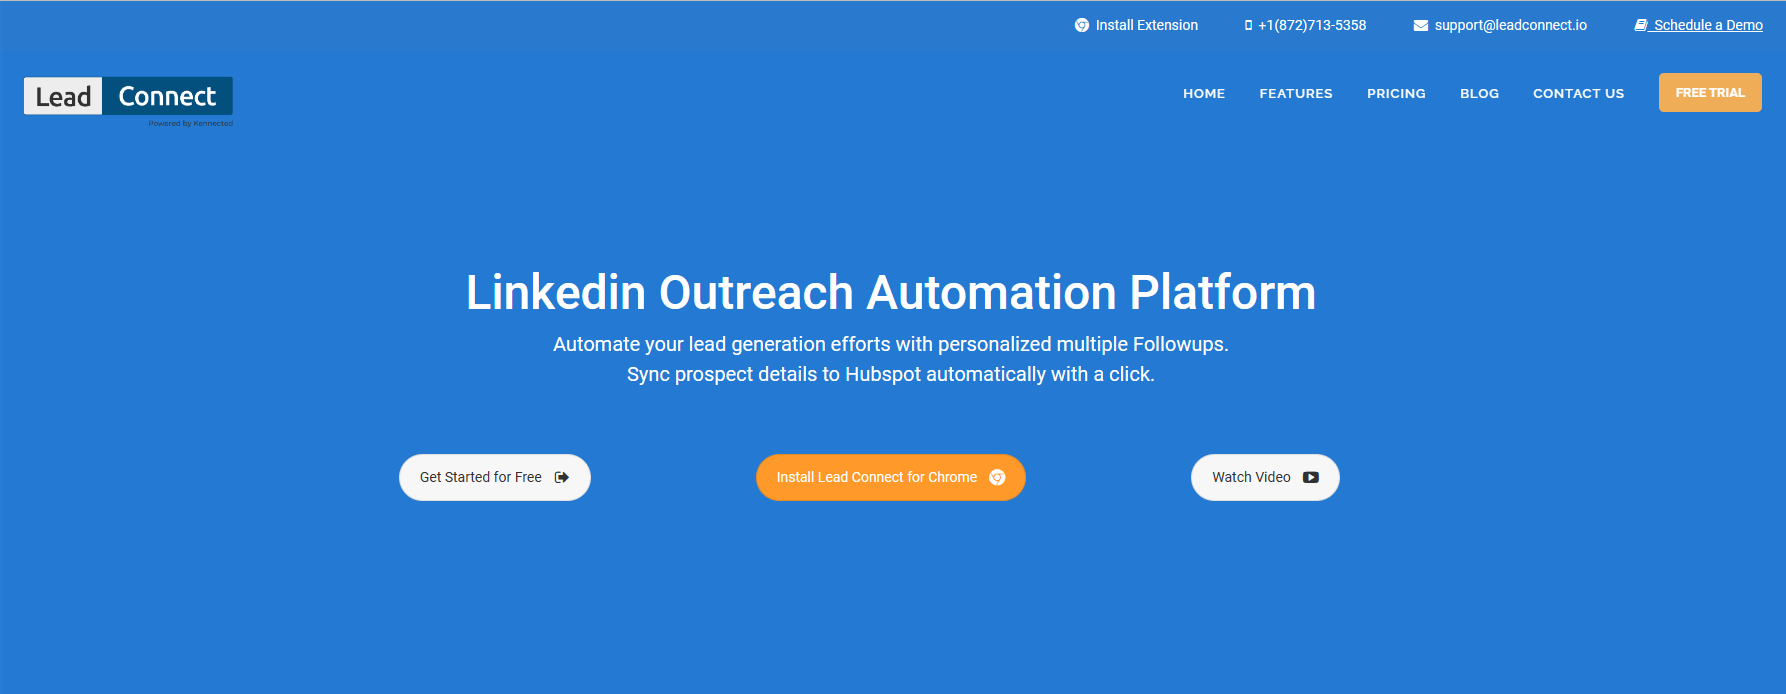 leadconnect automation tools